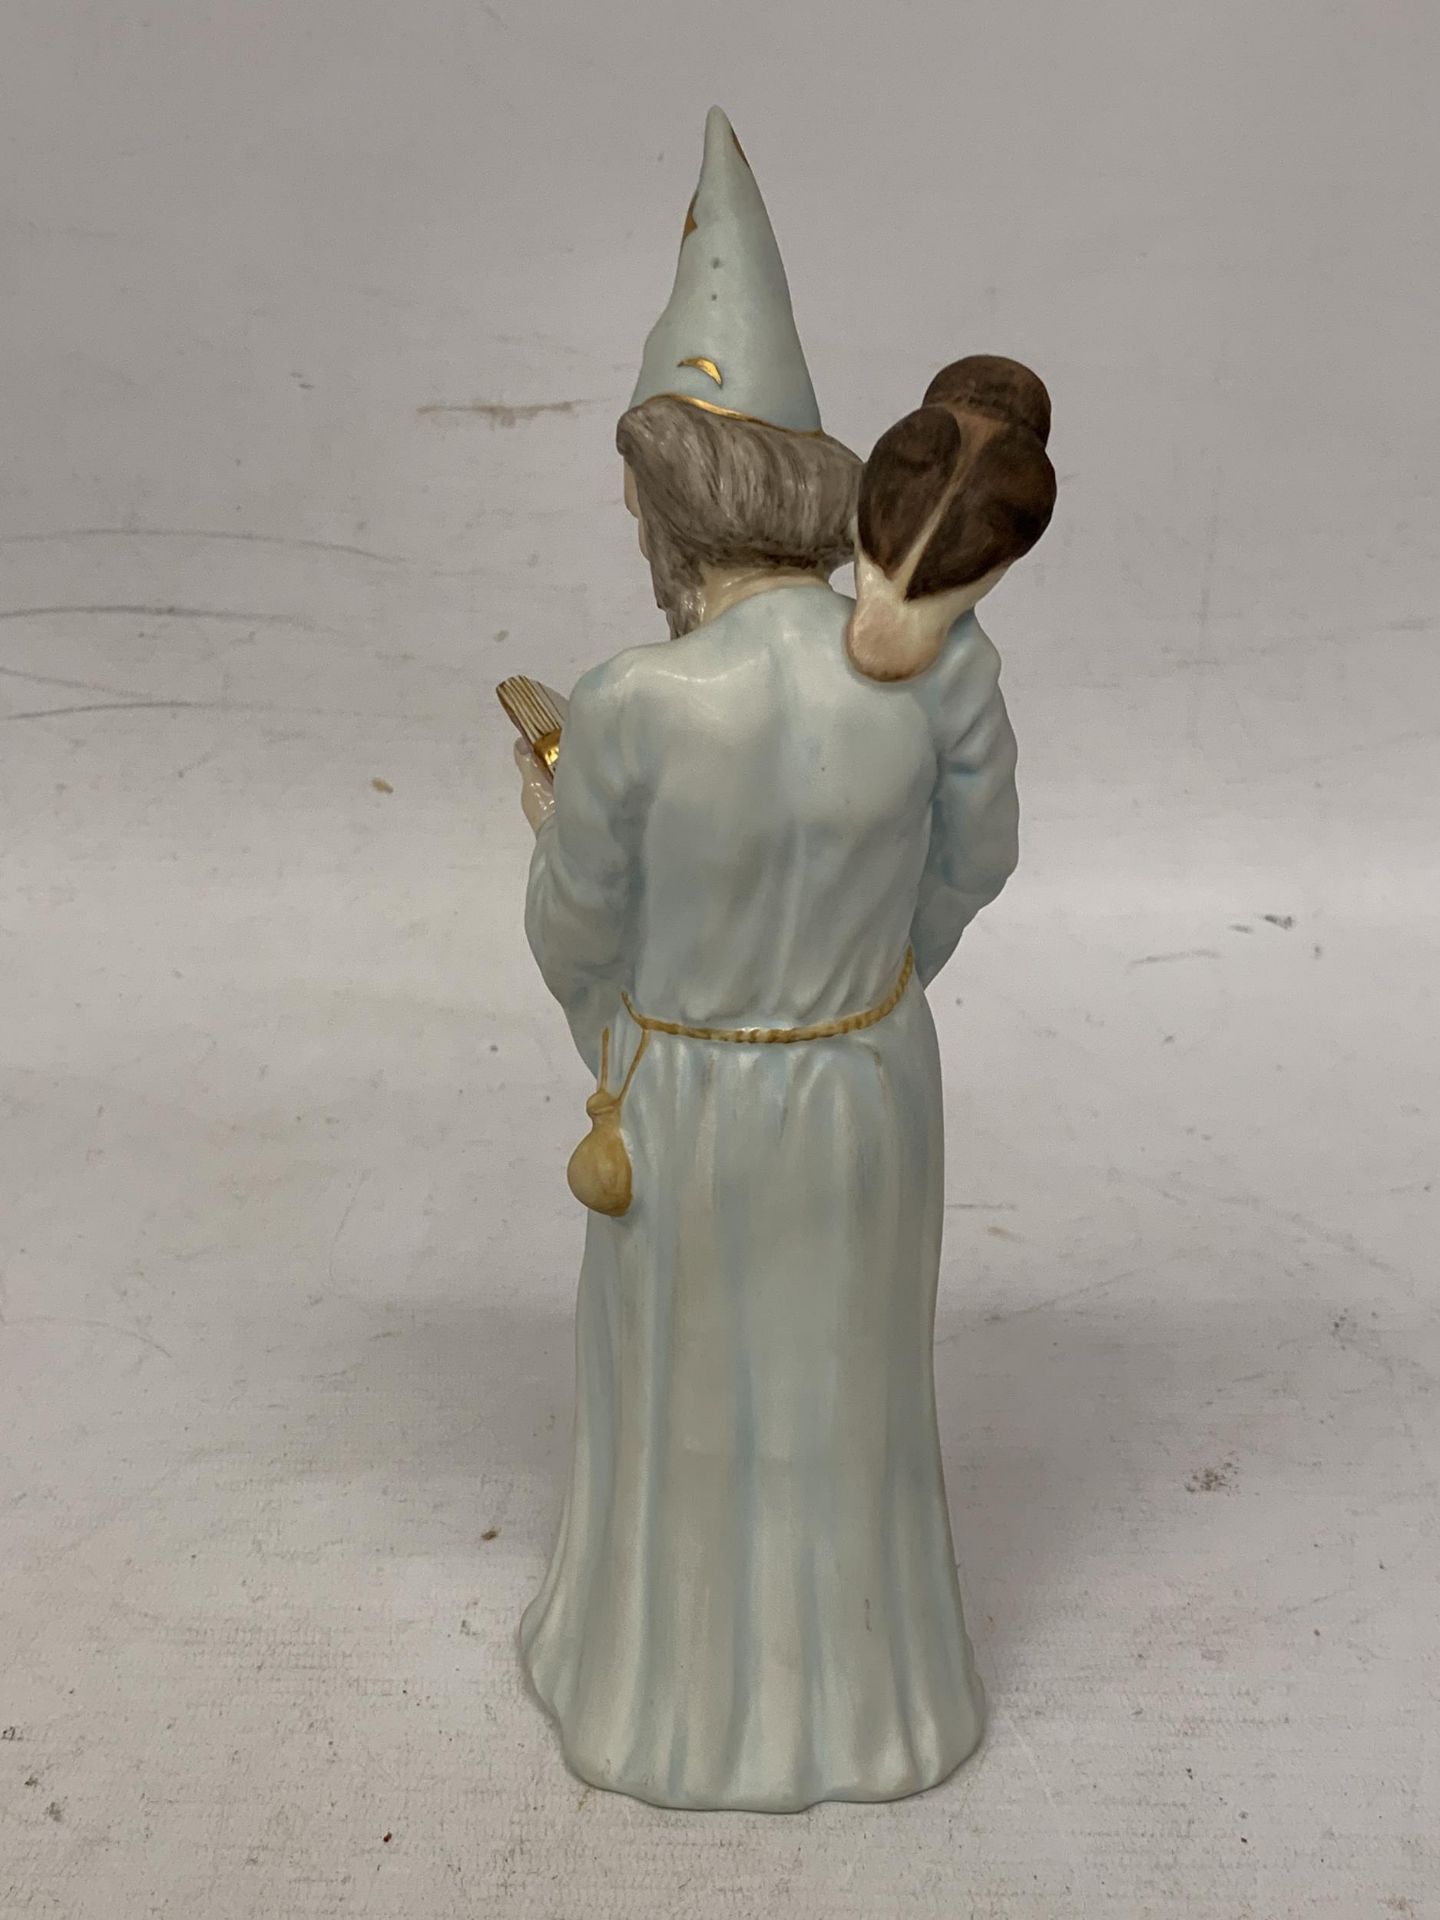 A ROYAL DOULTON FIGURE "THE WIZARD" HN 4069 LIMITED EDITION SIGNED IN GOLD - Image 3 of 5